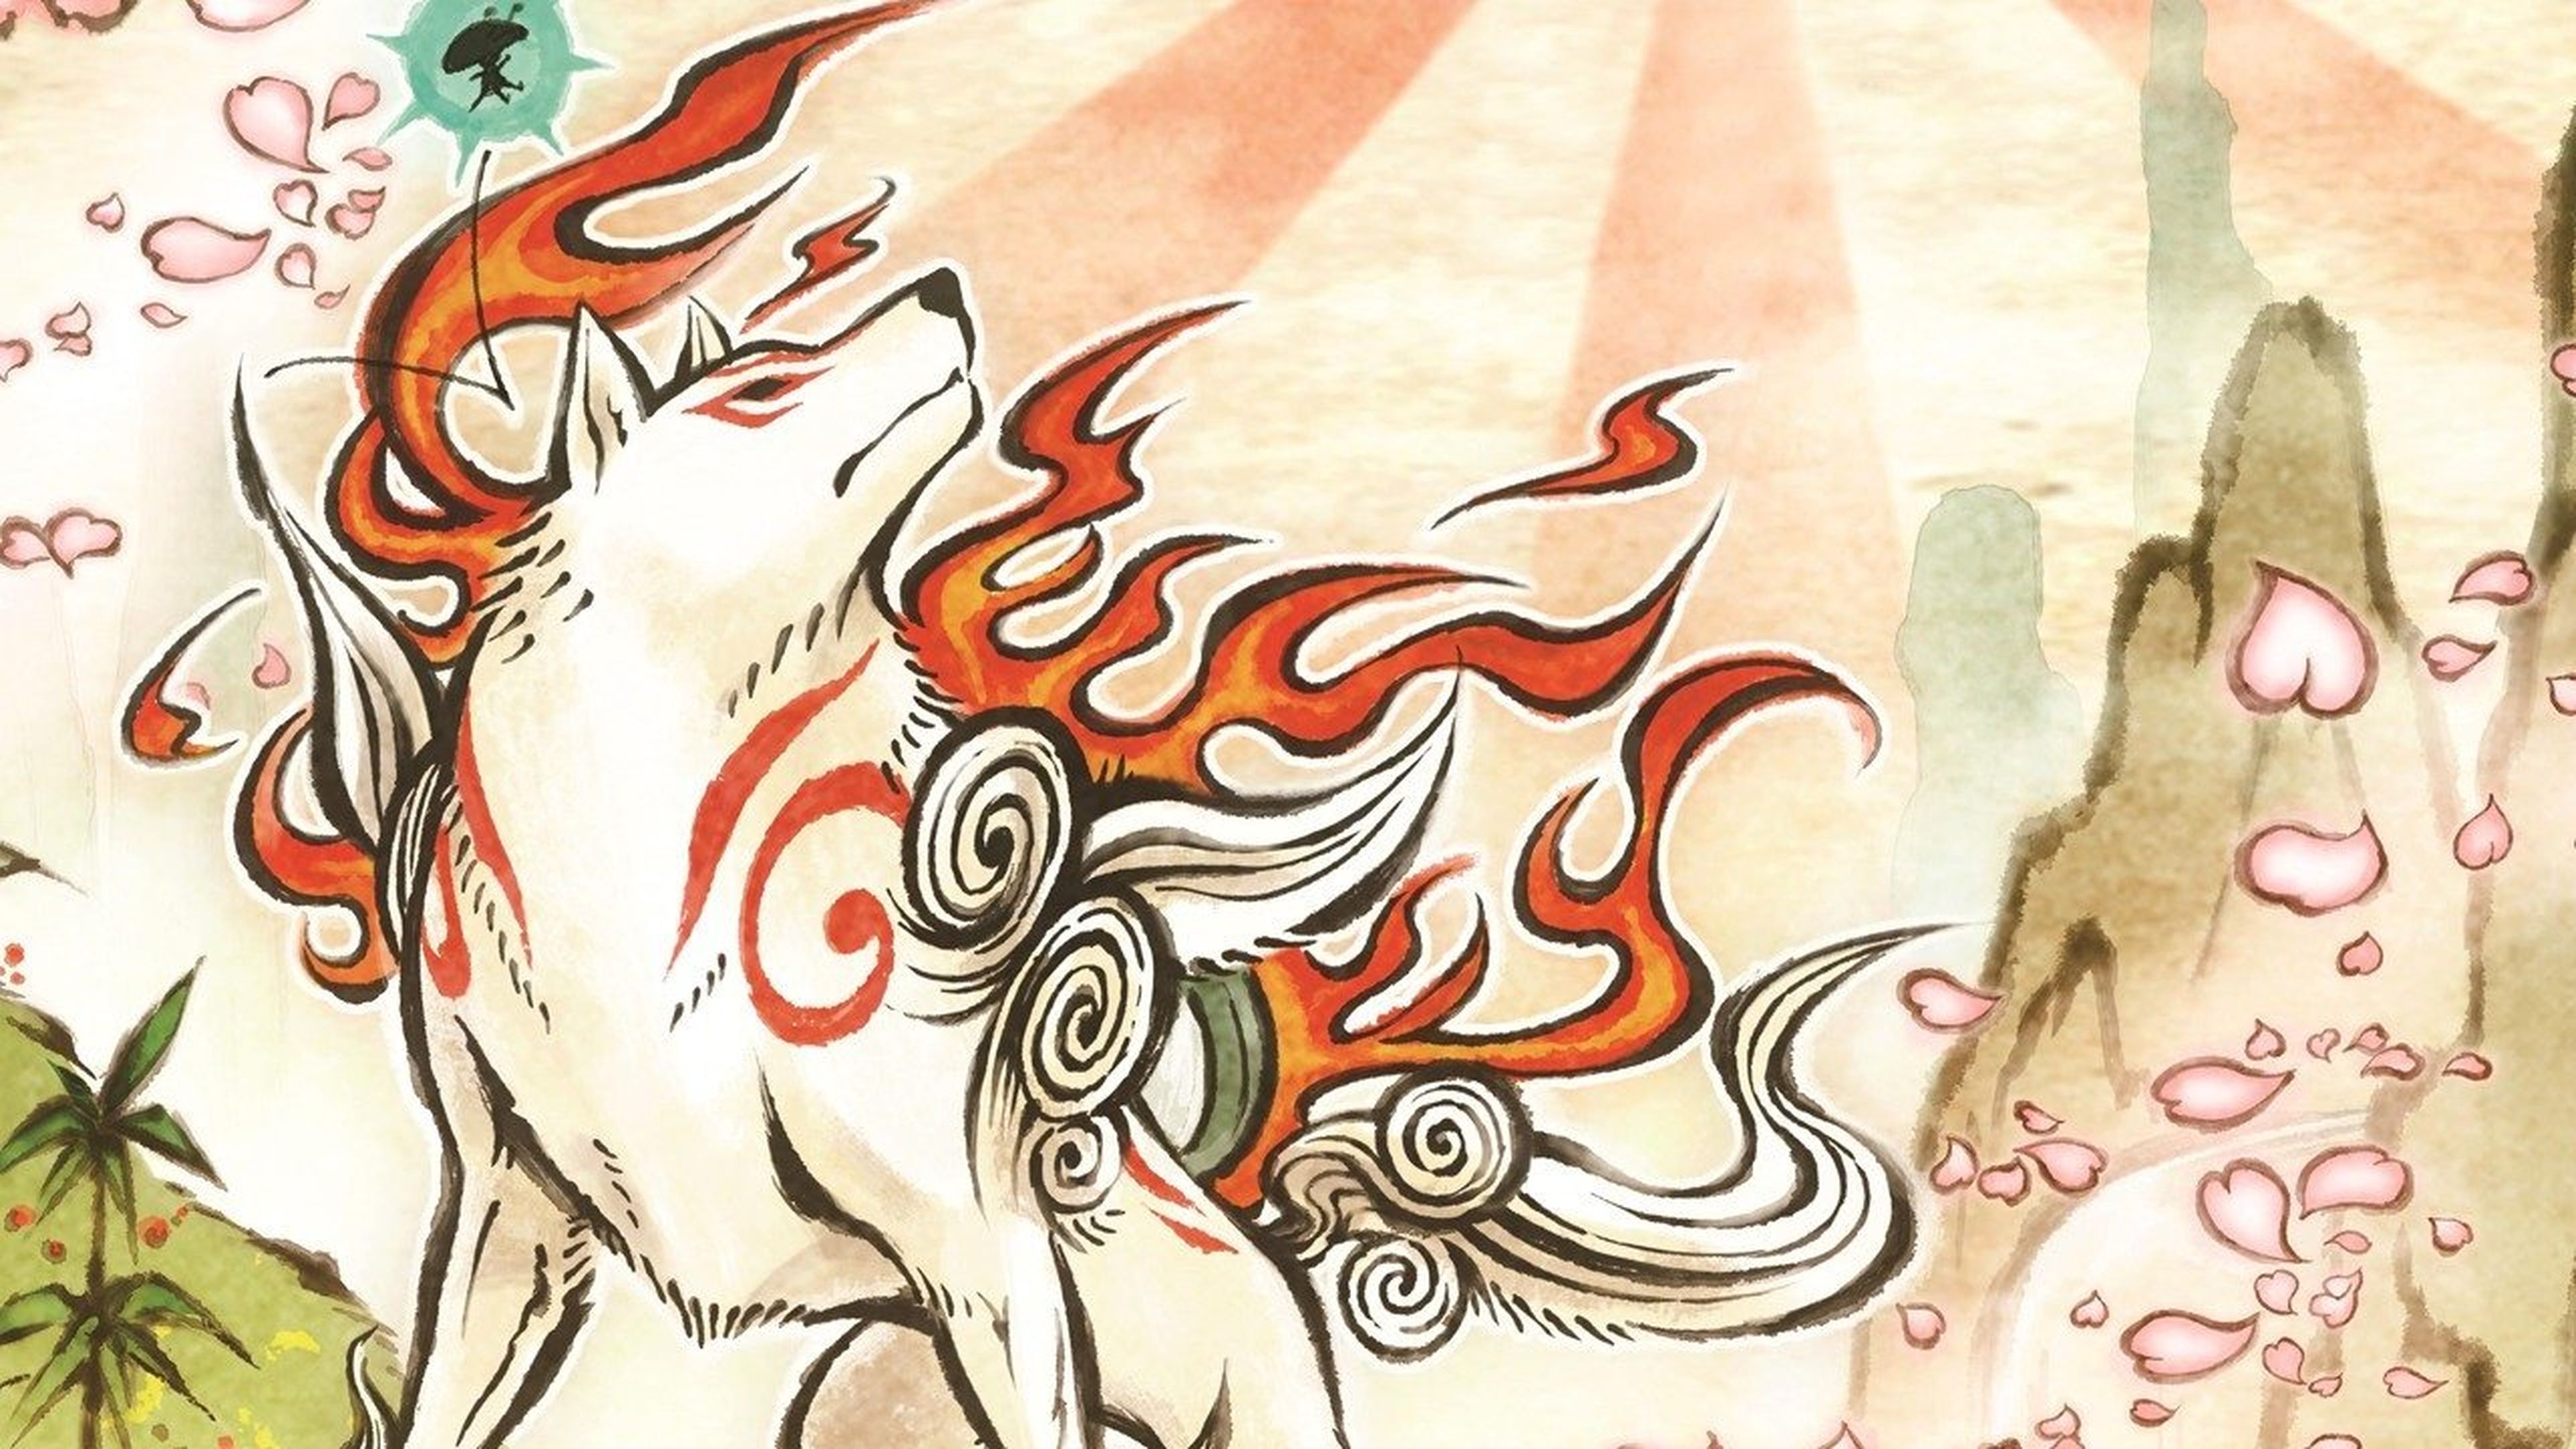 Okami HD comes to PS4, Xbox and PC on 12-12